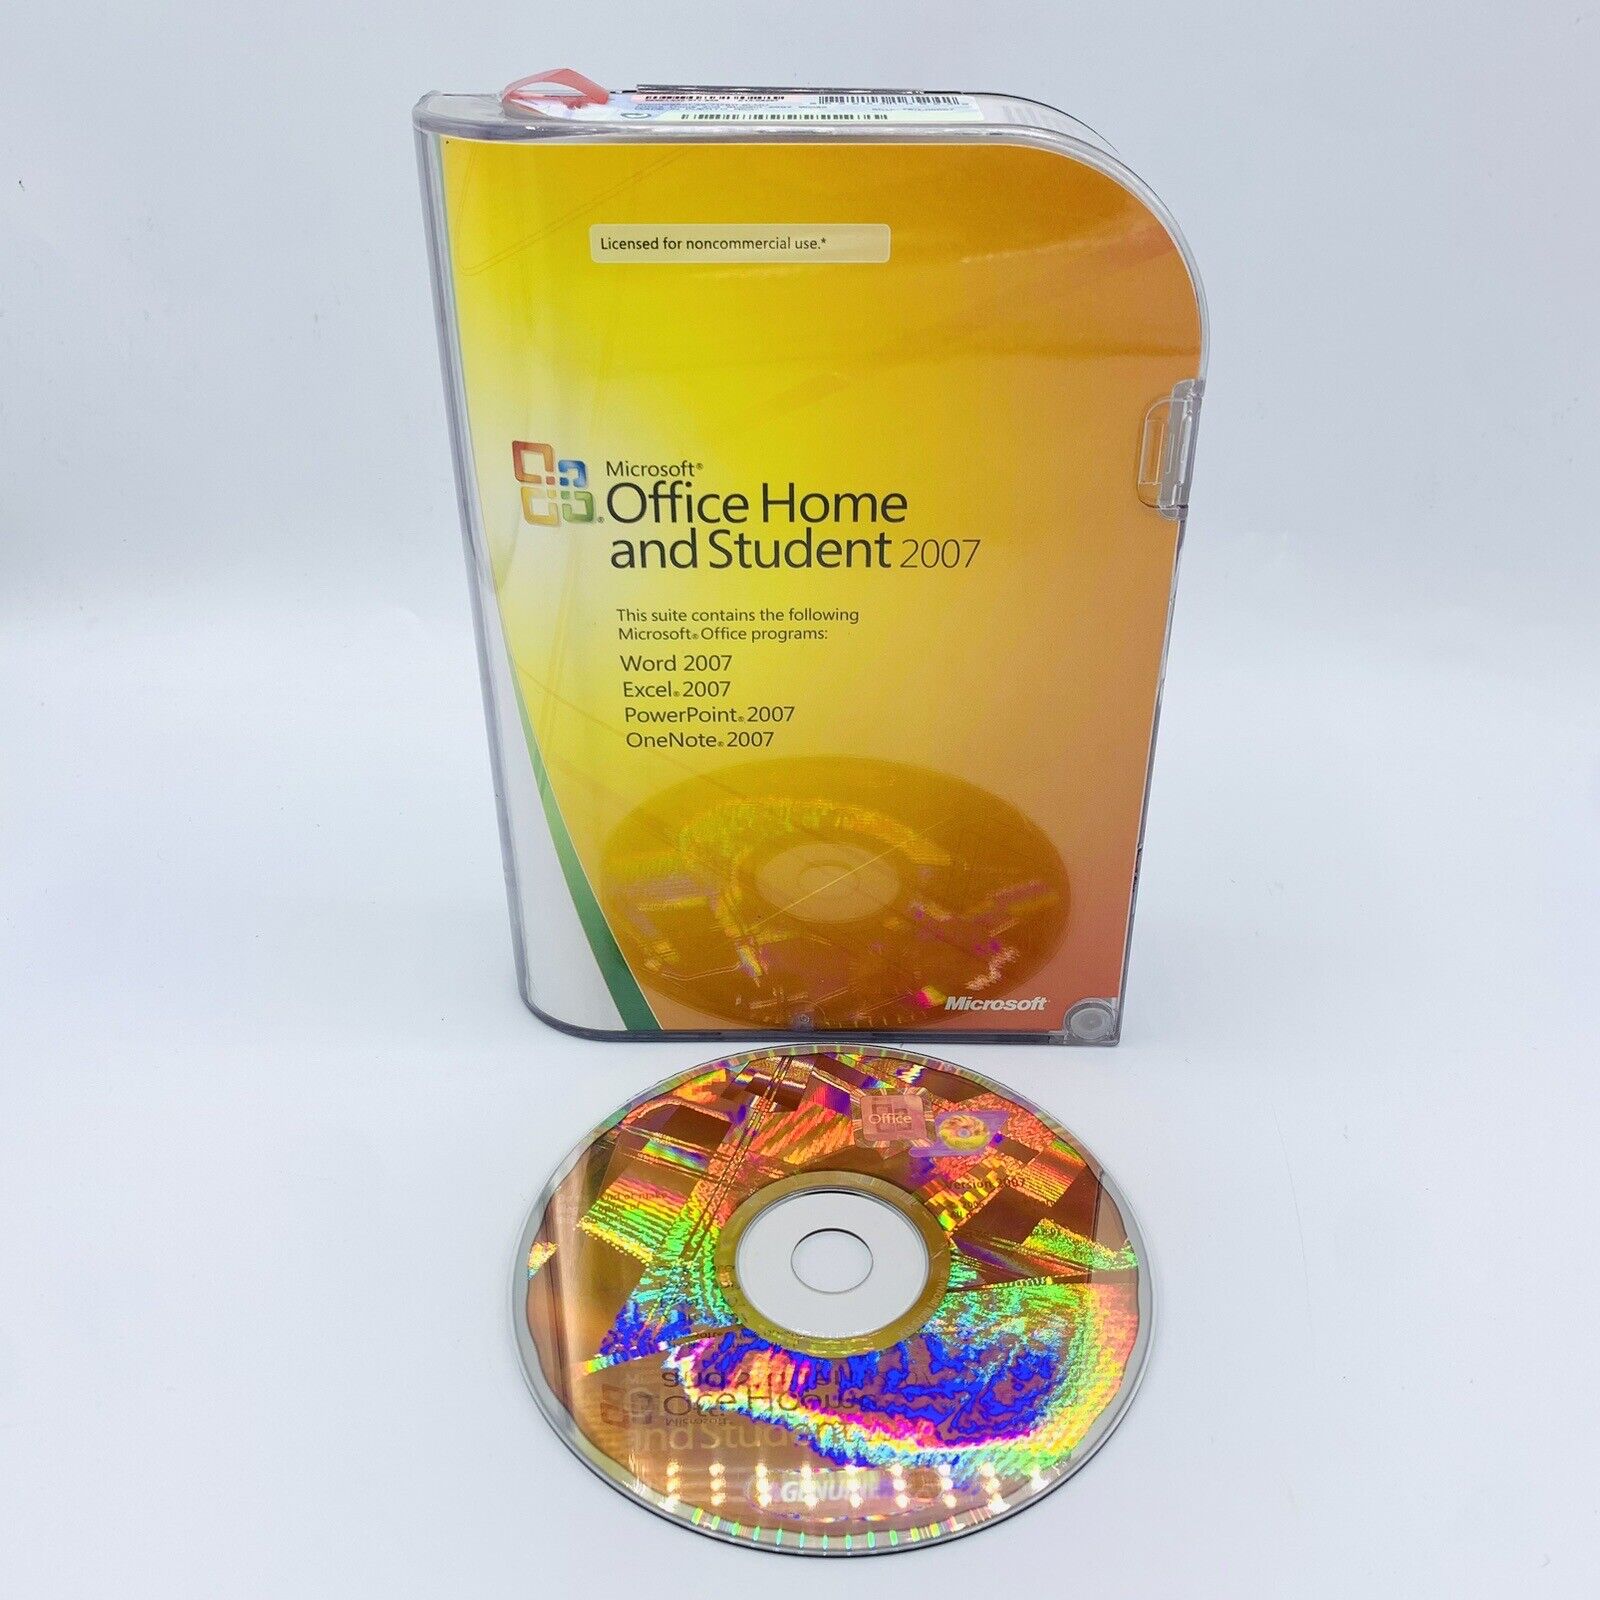 Microsoft Office Home And Student 2007 Genuine Retail CD w/ Product Key